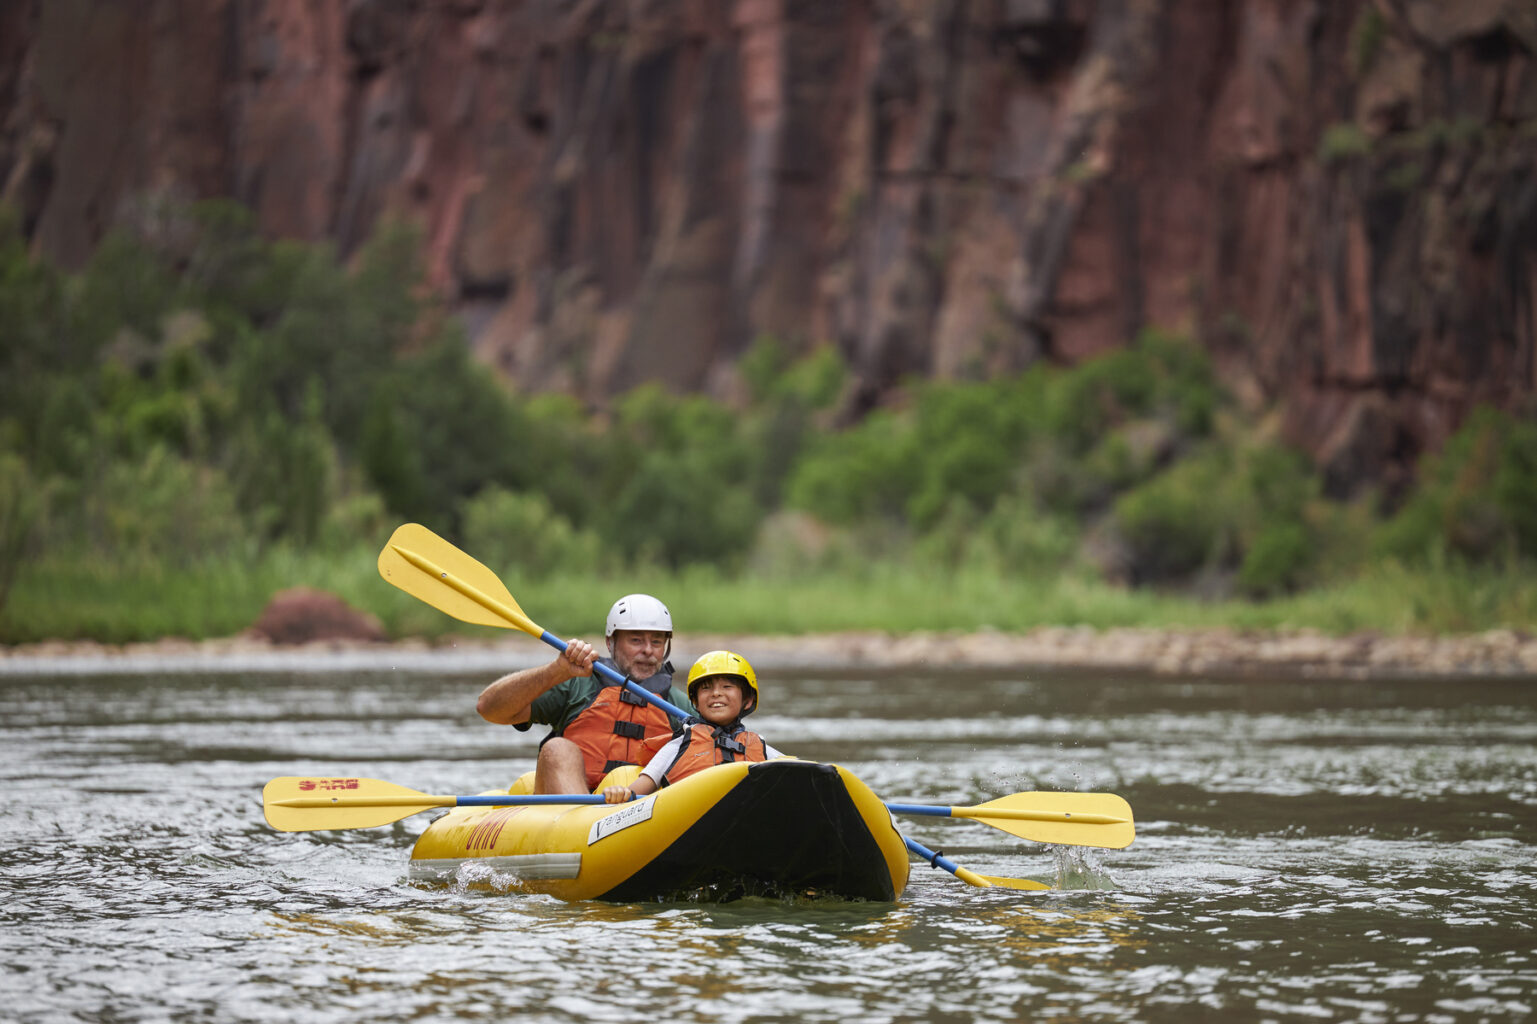 A older man and a boy paddle an inflatable kayak together  